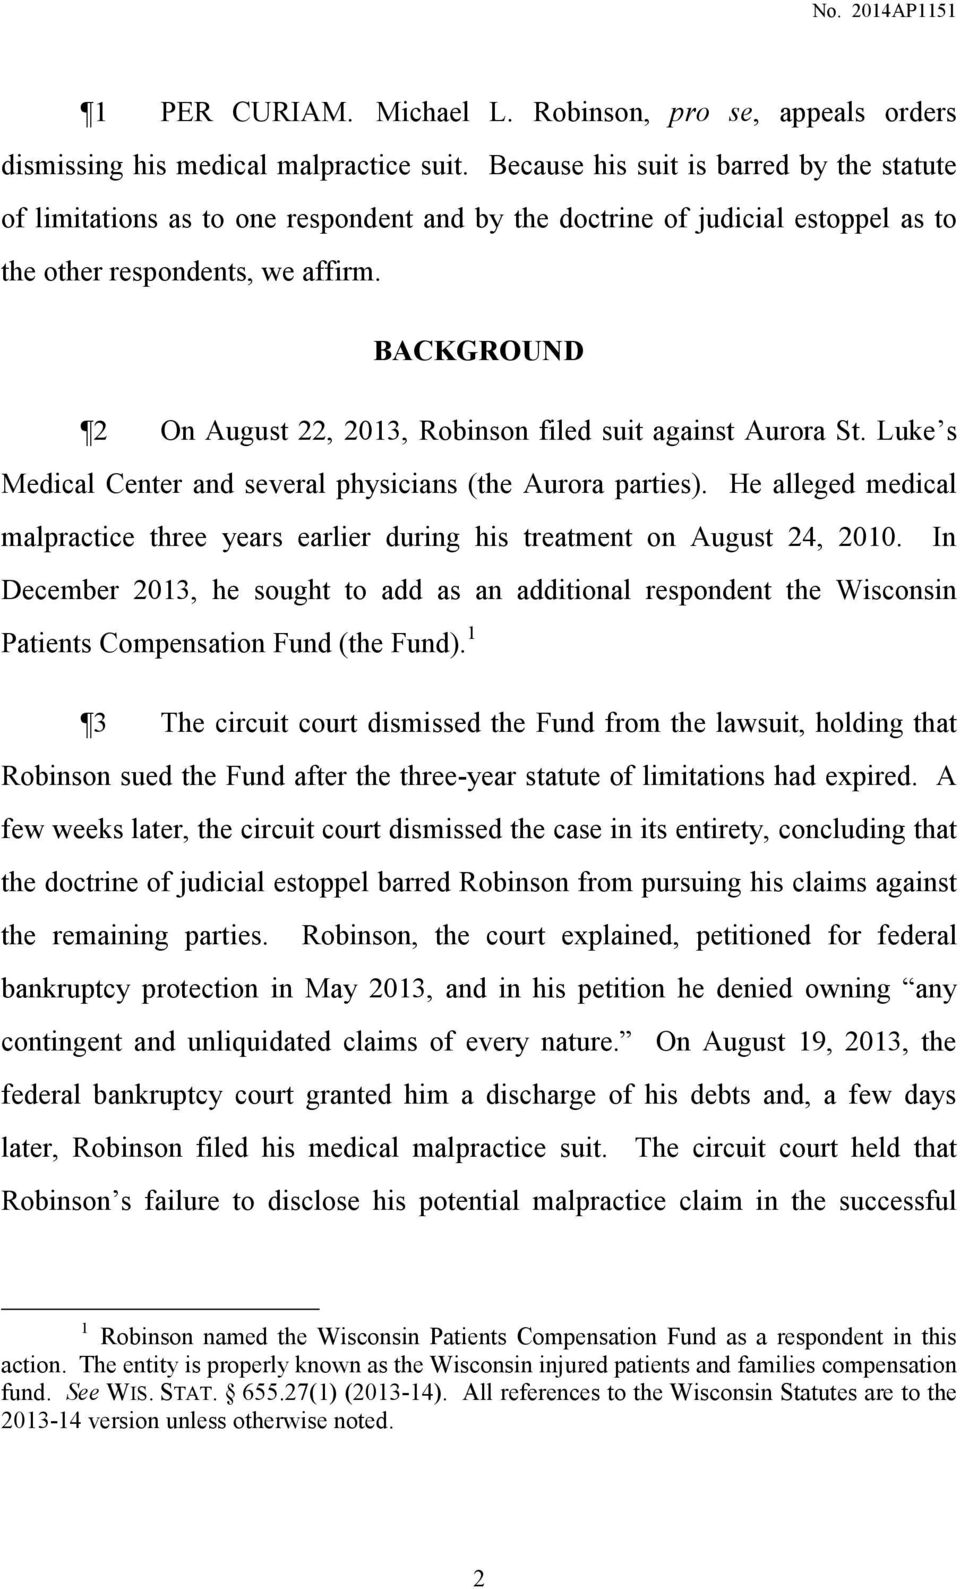 BACKGROUND 2 On August 22, 2013, Robinson filed suit against Aurora St. Luke s Medical Center and several physicians (the Aurora parties).